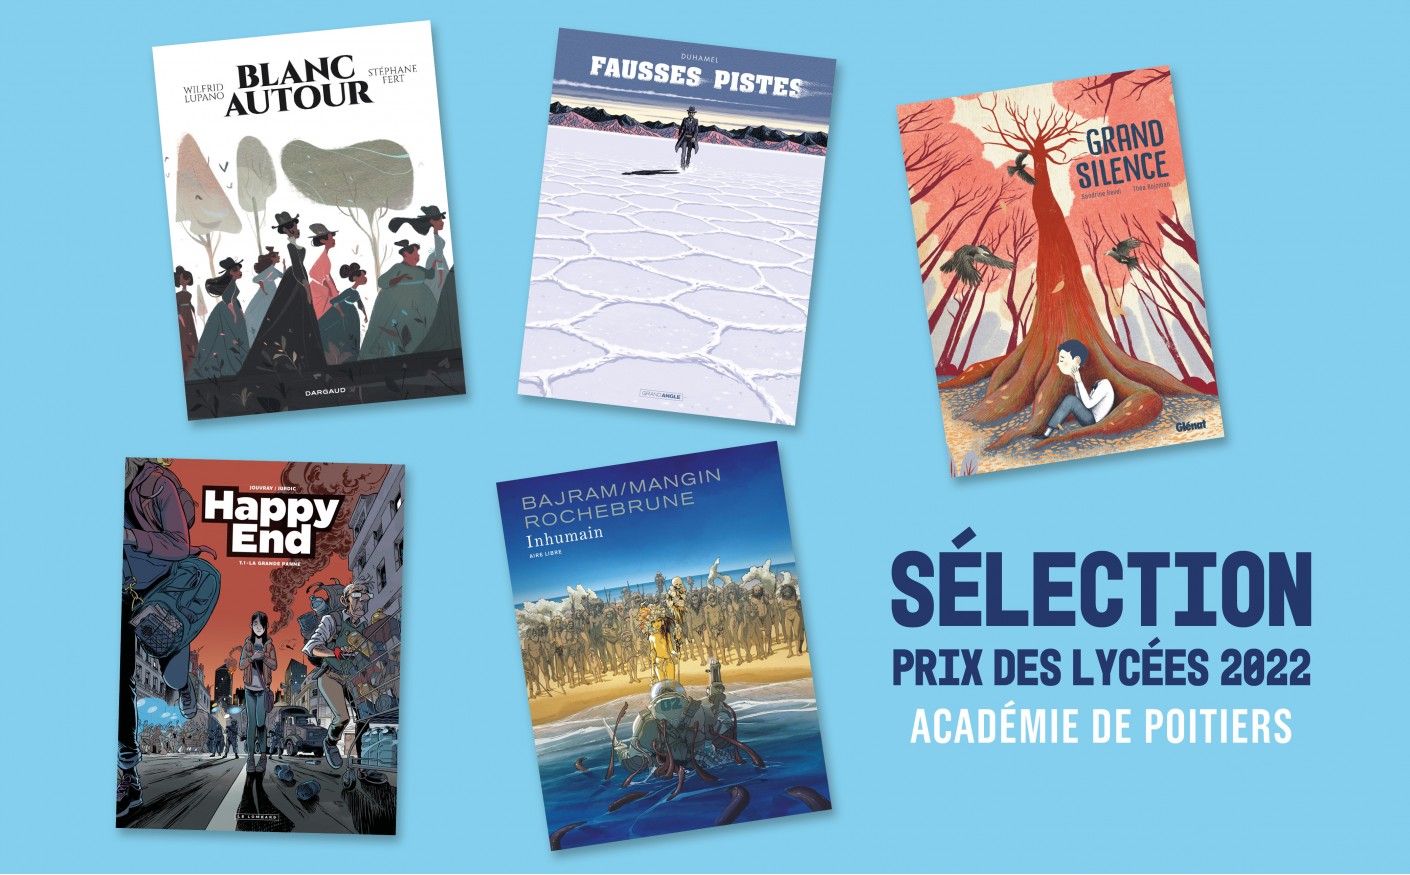 SelectionScolaire SliderLYCEES